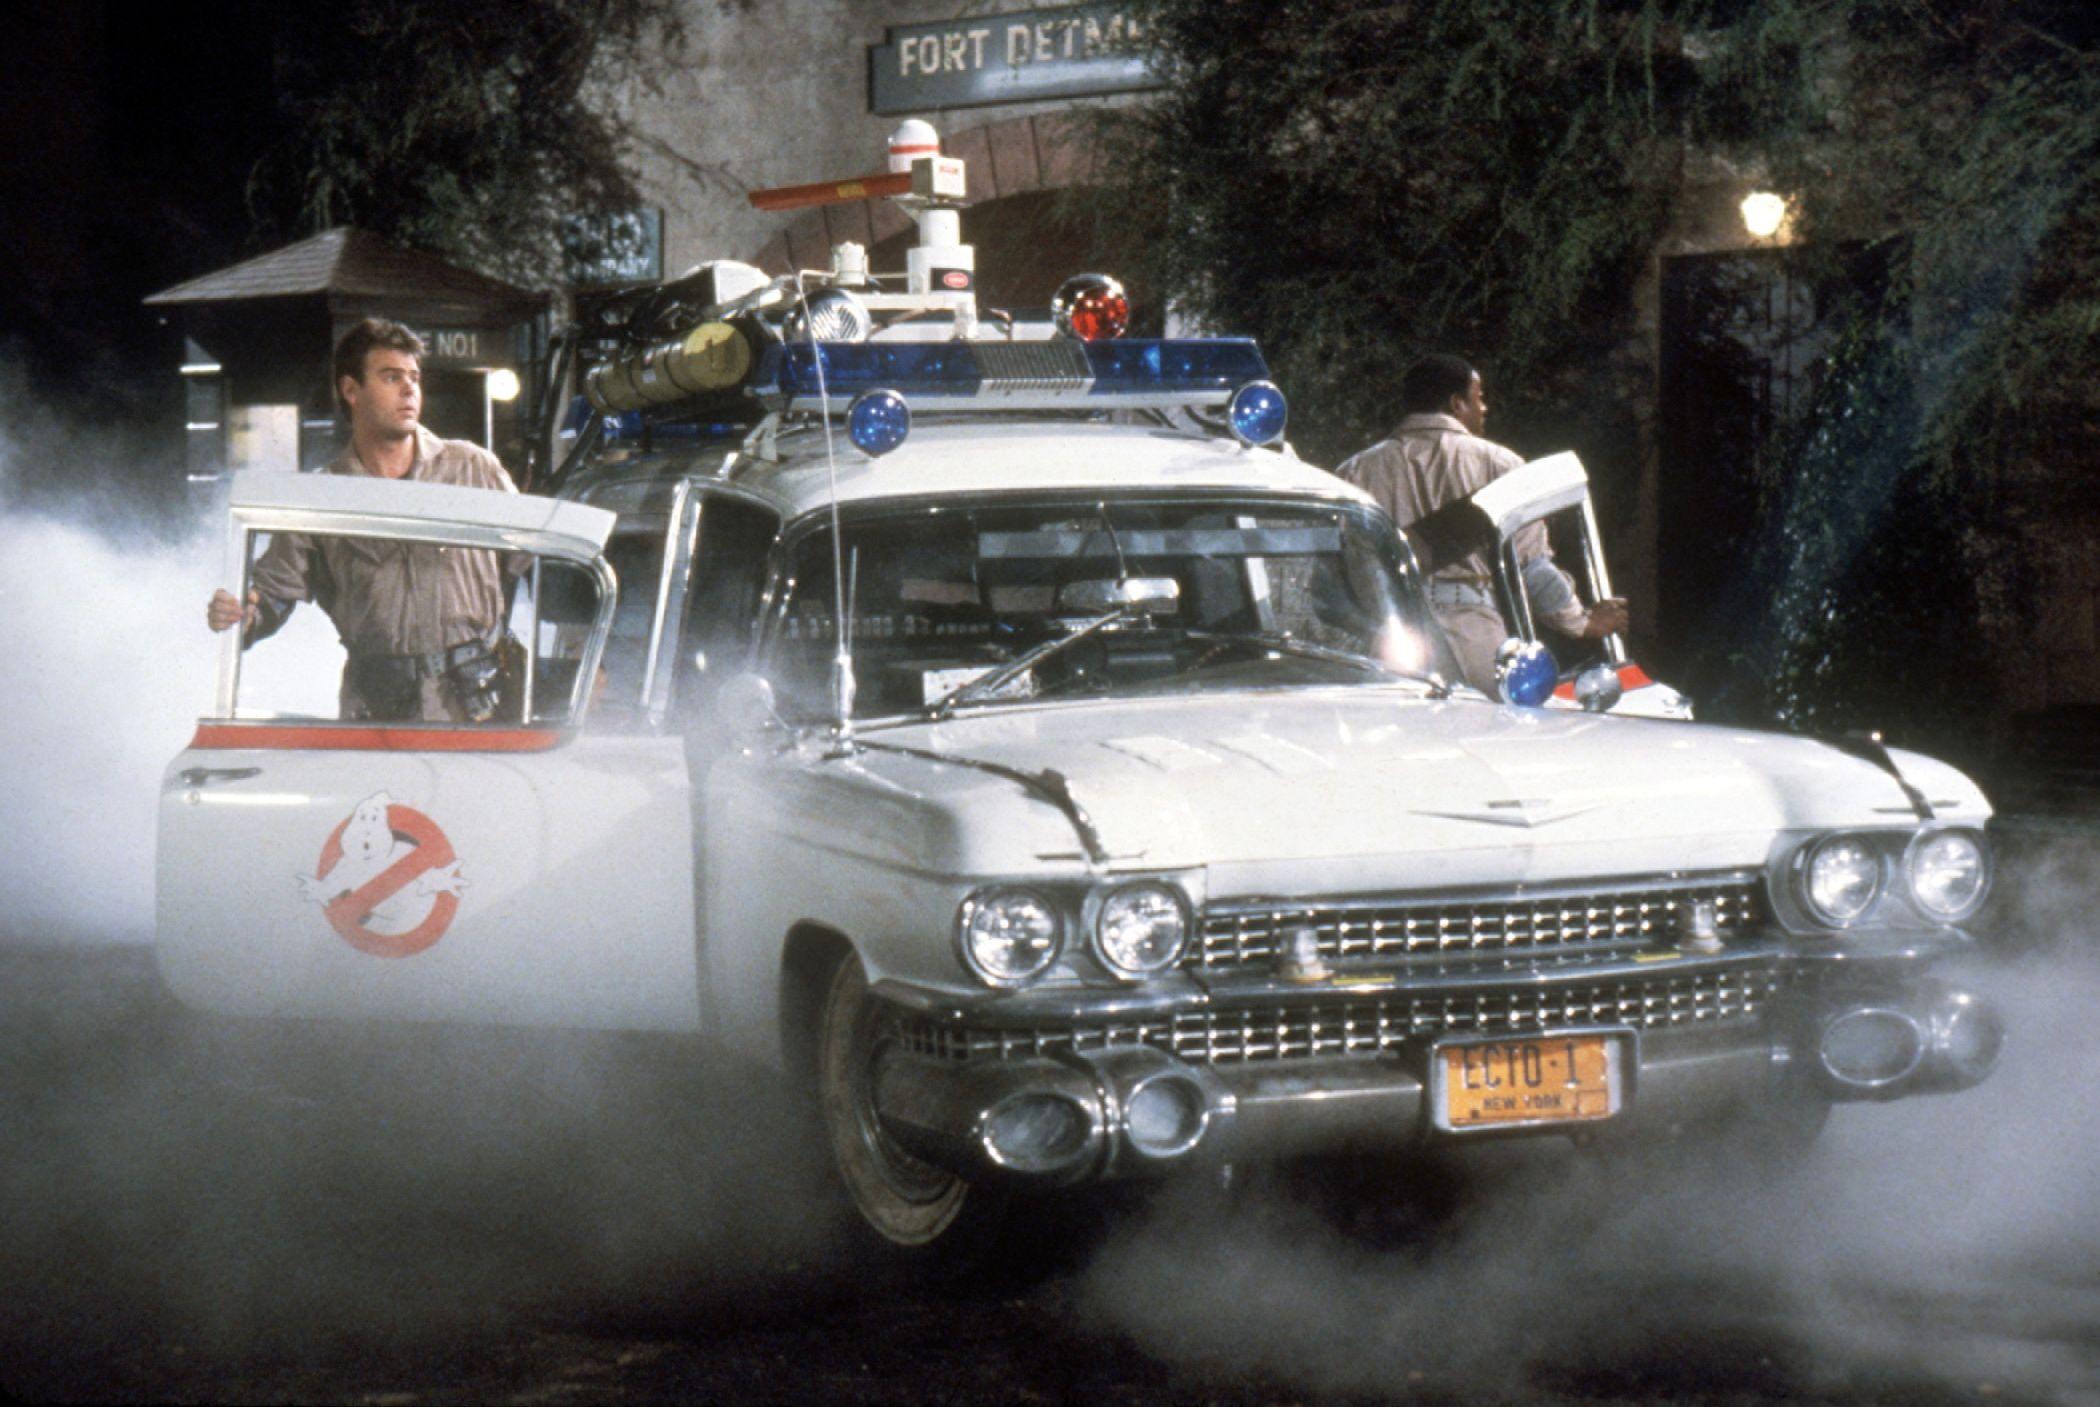 Ghostbusters number plate ECTO.1 on the Ectomobile. Movie stars